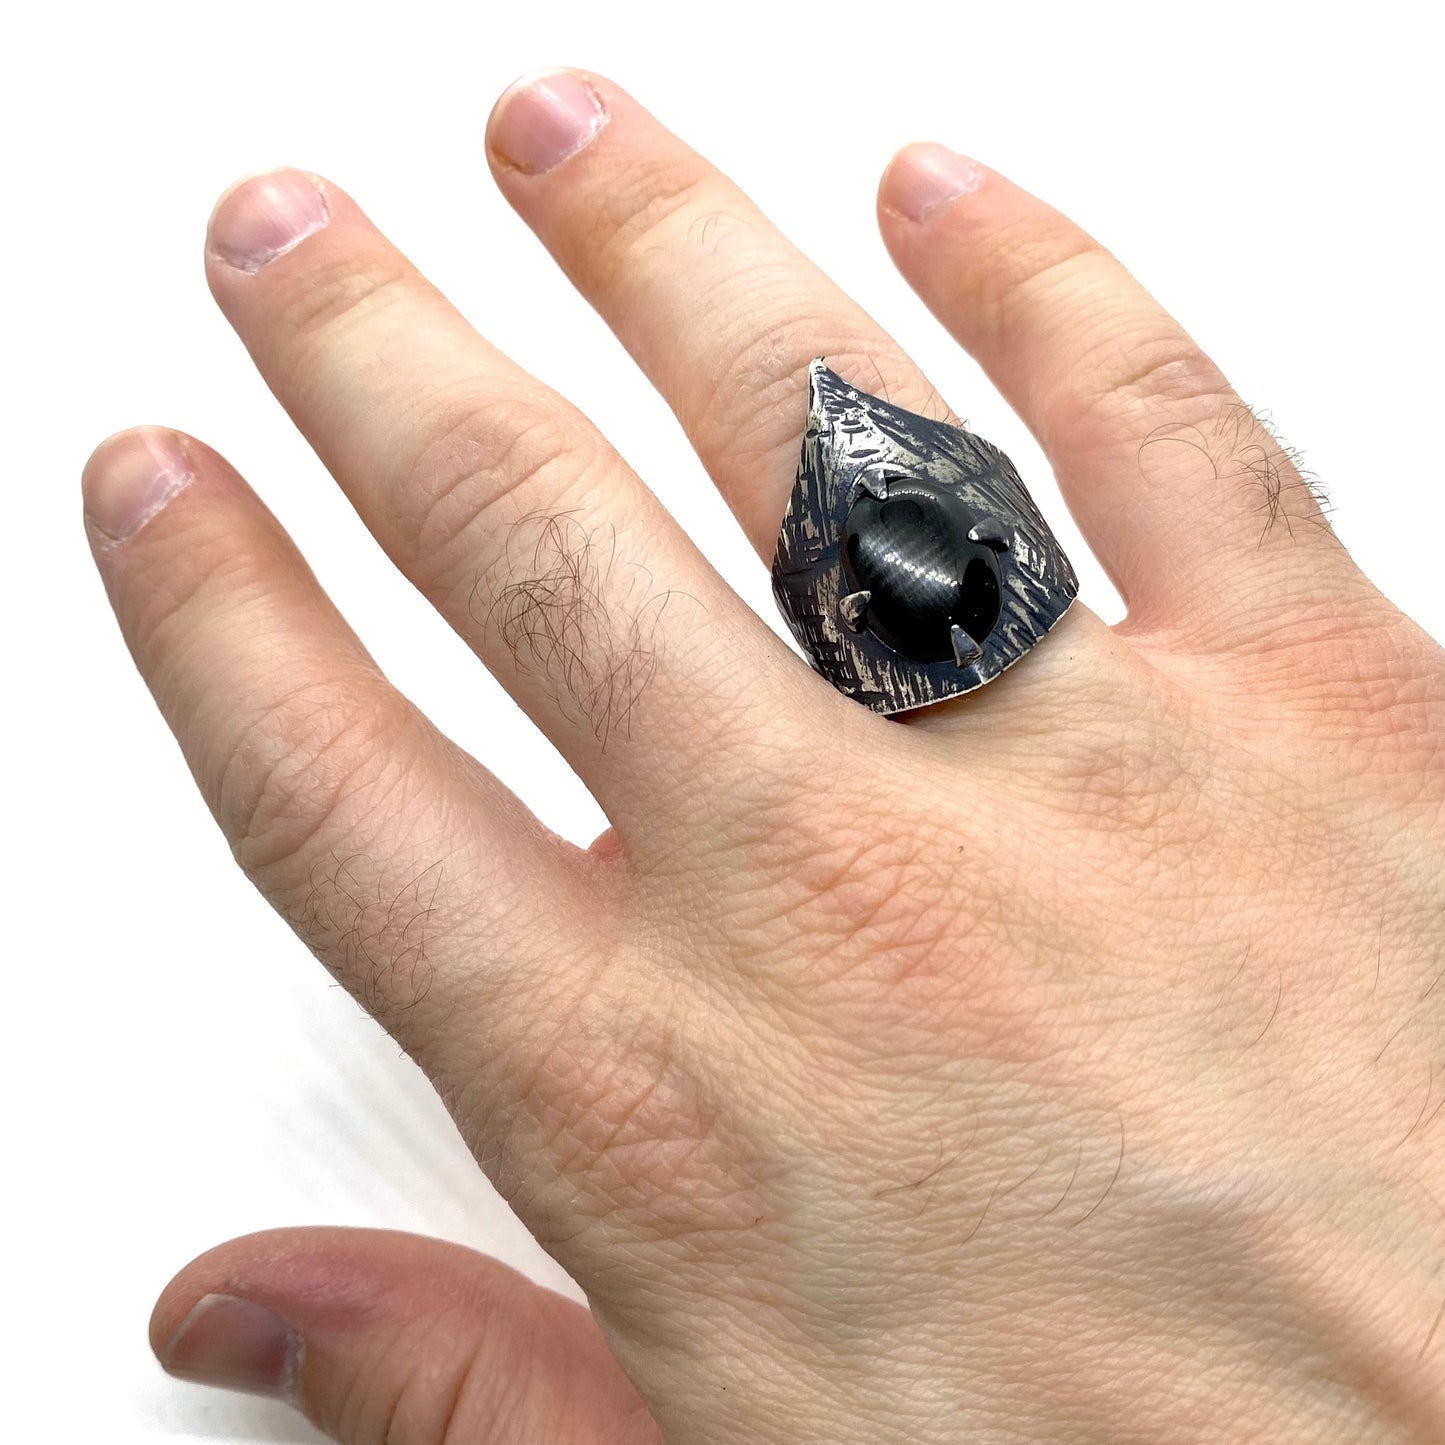 Thornguard’s Ring in Sterling silver